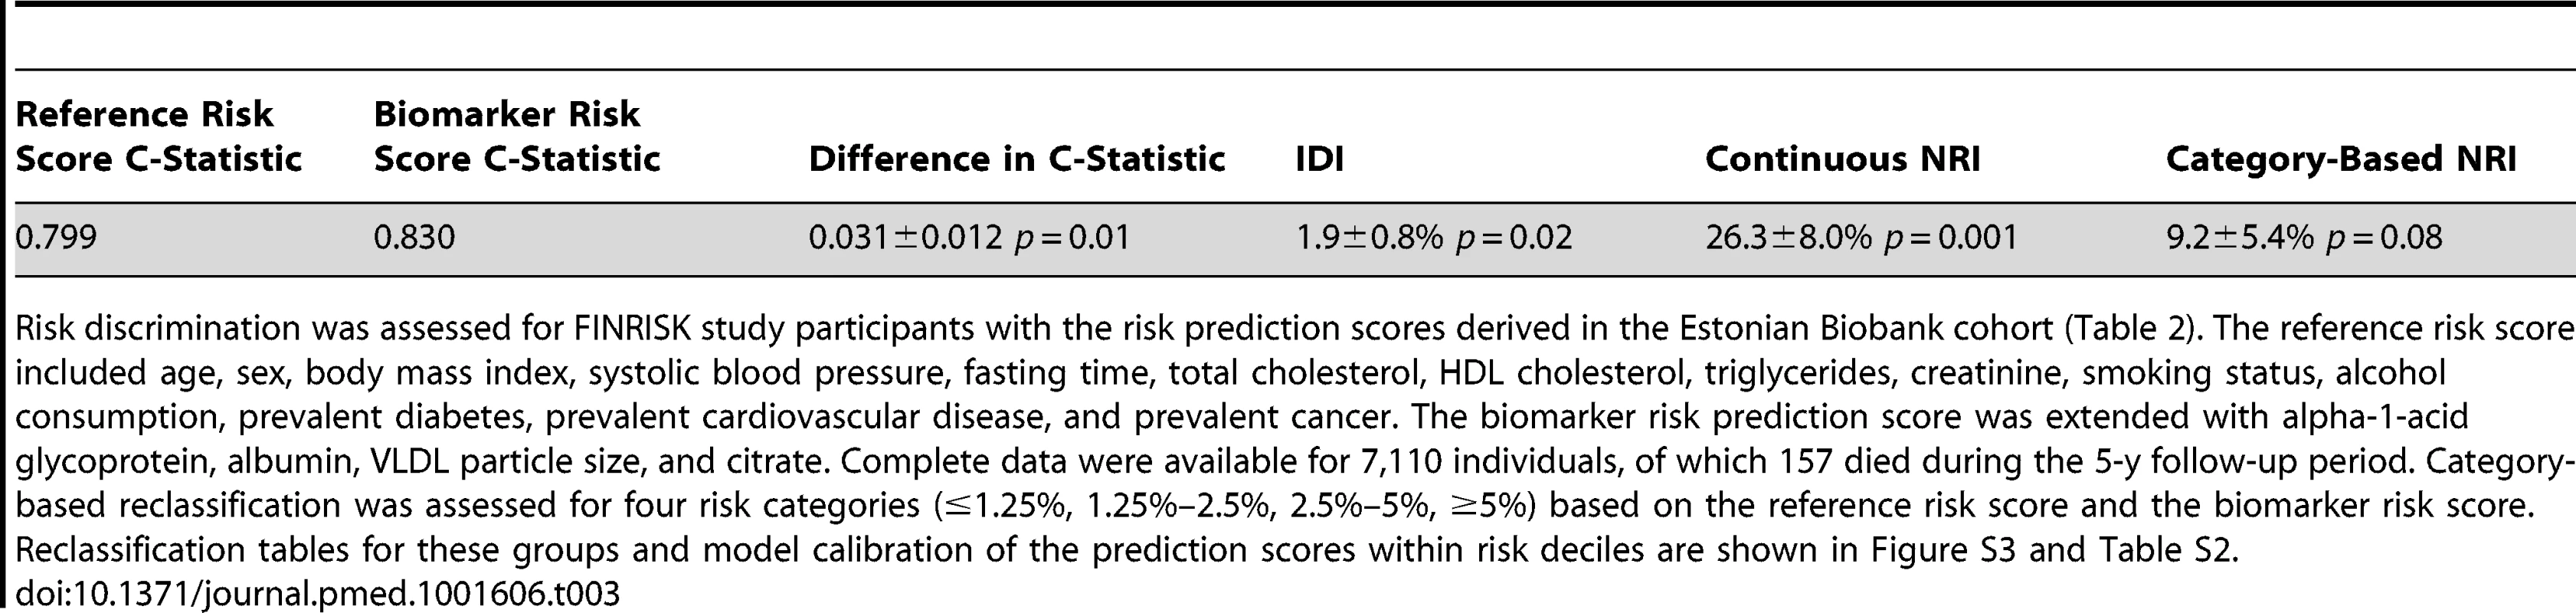 Discrimination and reclassification for 5-y all-cause mortality in the FINRISK cohort with and without circulating biomarkers in the risk prediction score.